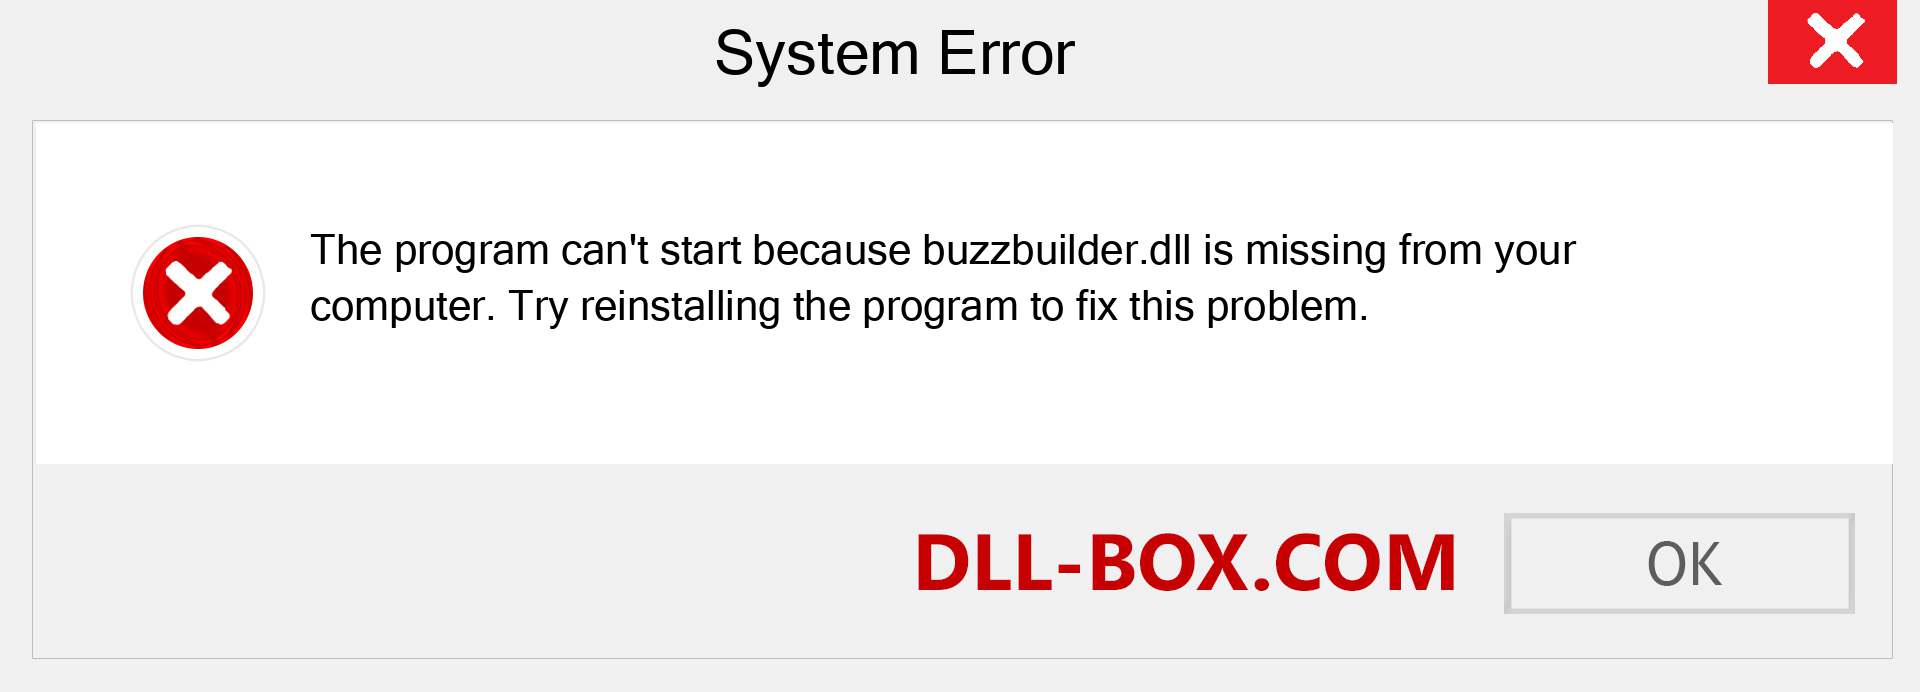  buzzbuilder.dll file is missing?. Download for Windows 7, 8, 10 - Fix  buzzbuilder dll Missing Error on Windows, photos, images